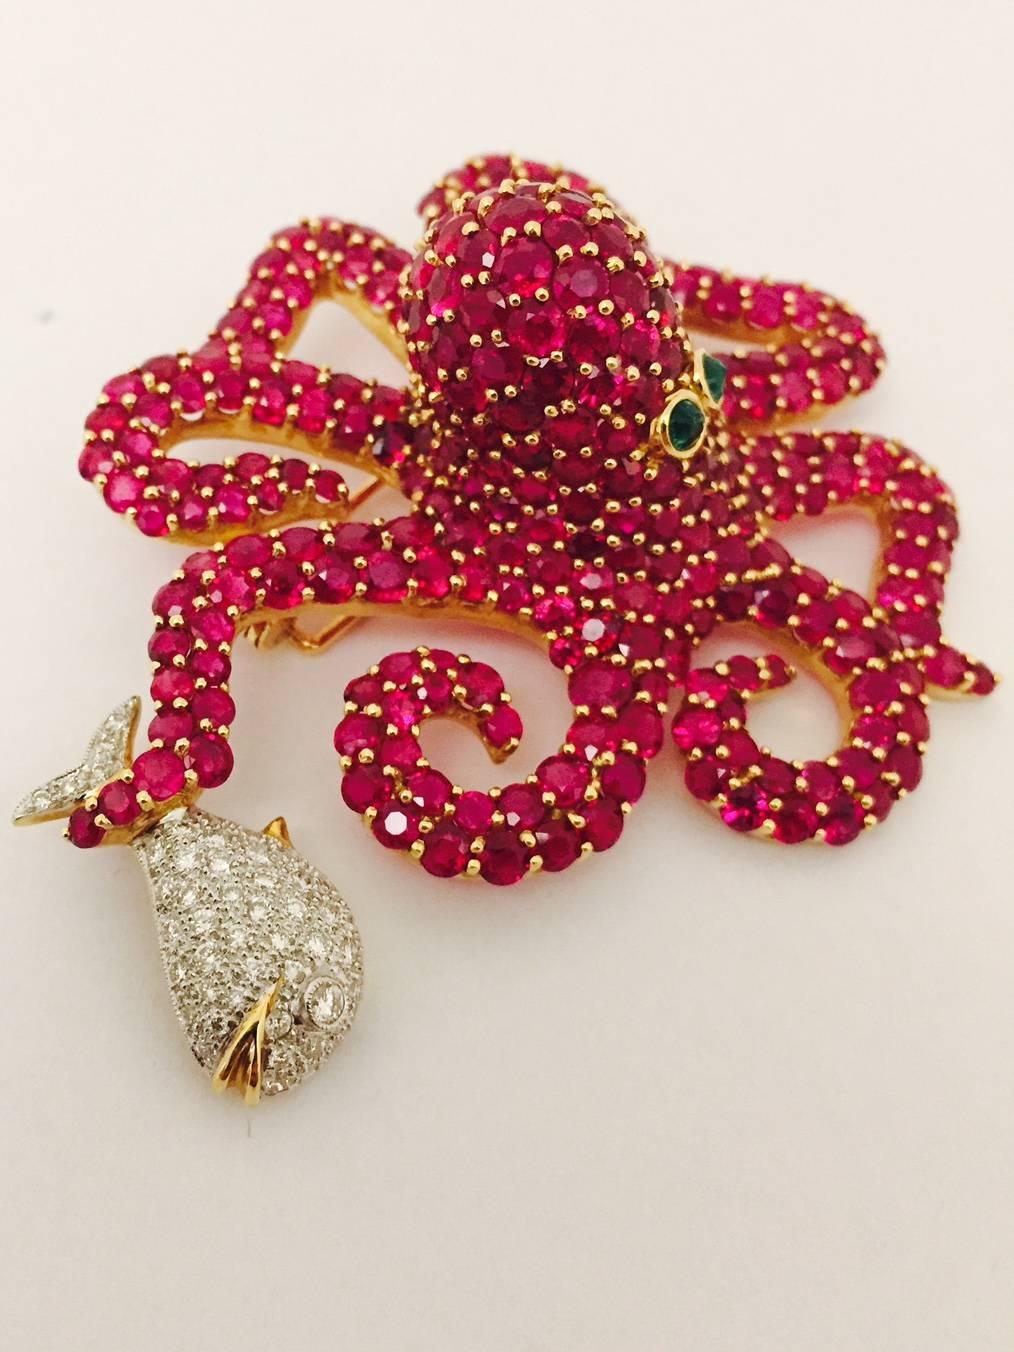 Marvin Katz has the uncanny ability to transform gems into works of art for the stars!  This outrageous octopus, carefully crafted in 18 karat yellow gold is replete with beautifully matched, faceted rubies weighing 3.57 carats total.  Eyes are